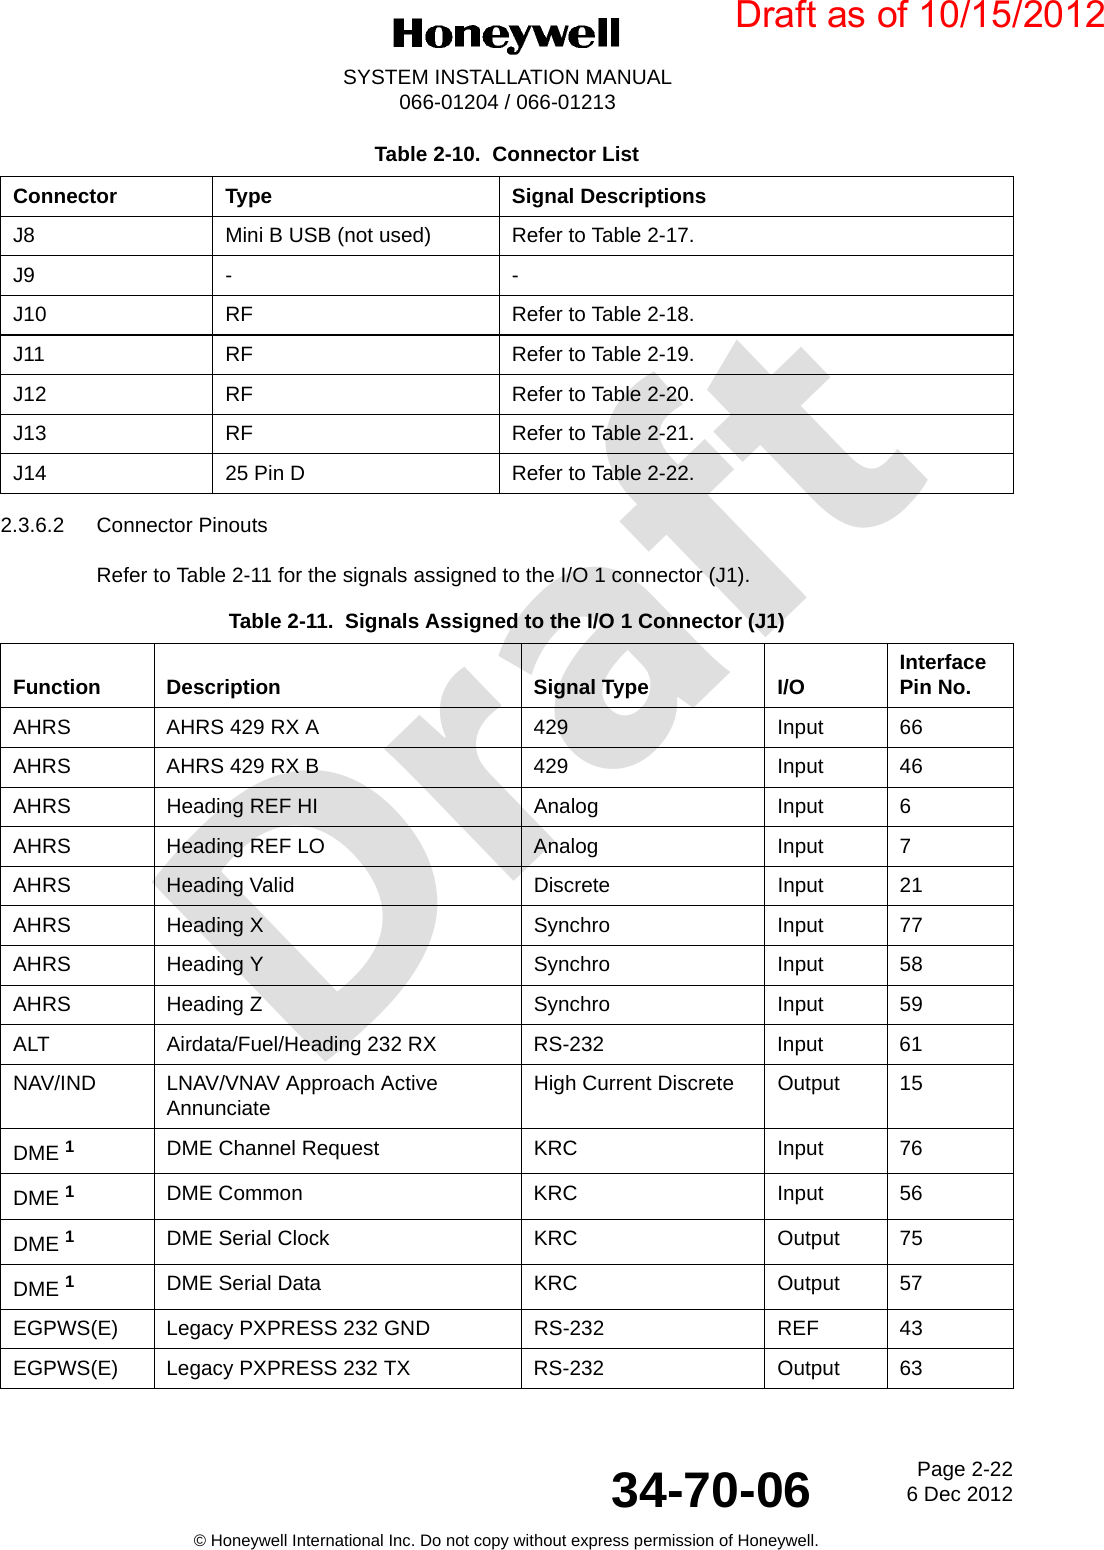 DraftPage 2-226 Dec 201234-70-06SYSTEM INSTALLATION MANUAL066-01204 / 066-01213© Honeywell International Inc. Do not copy without express permission of Honeywell.2.3.6.2 Connector PinoutsRefer to Table 2-11 for the signals assigned to the I/O 1 connector (J1).J8 Mini B USB (not used) Refer to Table 2-17.J9 - -J10 RF Refer to Table 2-18.J11 RF Refer to Table 2-19.J12 RF Refer to Table 2-20.J13 RF Refer to Table 2-21.J14 25 Pin D Refer to Table 2-22.Table 2-11.  Signals Assigned to the I/O 1 Connector (J1) Function Description Signal Type I/O Interface Pin No.AHRS AHRS 429 RX A 429 Input 66AHRS AHRS 429 RX B 429 Input 46AHRS Heading REF HI Analog Input 6AHRS Heading REF LO Analog Input 7AHRS Heading Valid Discrete Input 21AHRS Heading X Synchro Input 77AHRS Heading Y Synchro Input 58AHRS Heading Z Synchro Input 59ALT Airdata/Fuel/Heading 232 RX RS-232 Input 61NAV/IND LNAV/VNAV Approach Active Annunciate High Current Discrete Output 15DME 1DME Channel Request KRC Input 76DME 1DME Common KRC Input 56DME 1DME Serial Clock KRC Output 75DME 1DME Serial Data KRC Output 57EGPWS(E) Legacy PXPRESS 232 GND RS-232 REF 43EGPWS(E) Legacy PXPRESS 232 TX RS-232 Output 63Table 2-10.  Connector ListConnector Type Signal DescriptionsDraft as of 10/15/2012